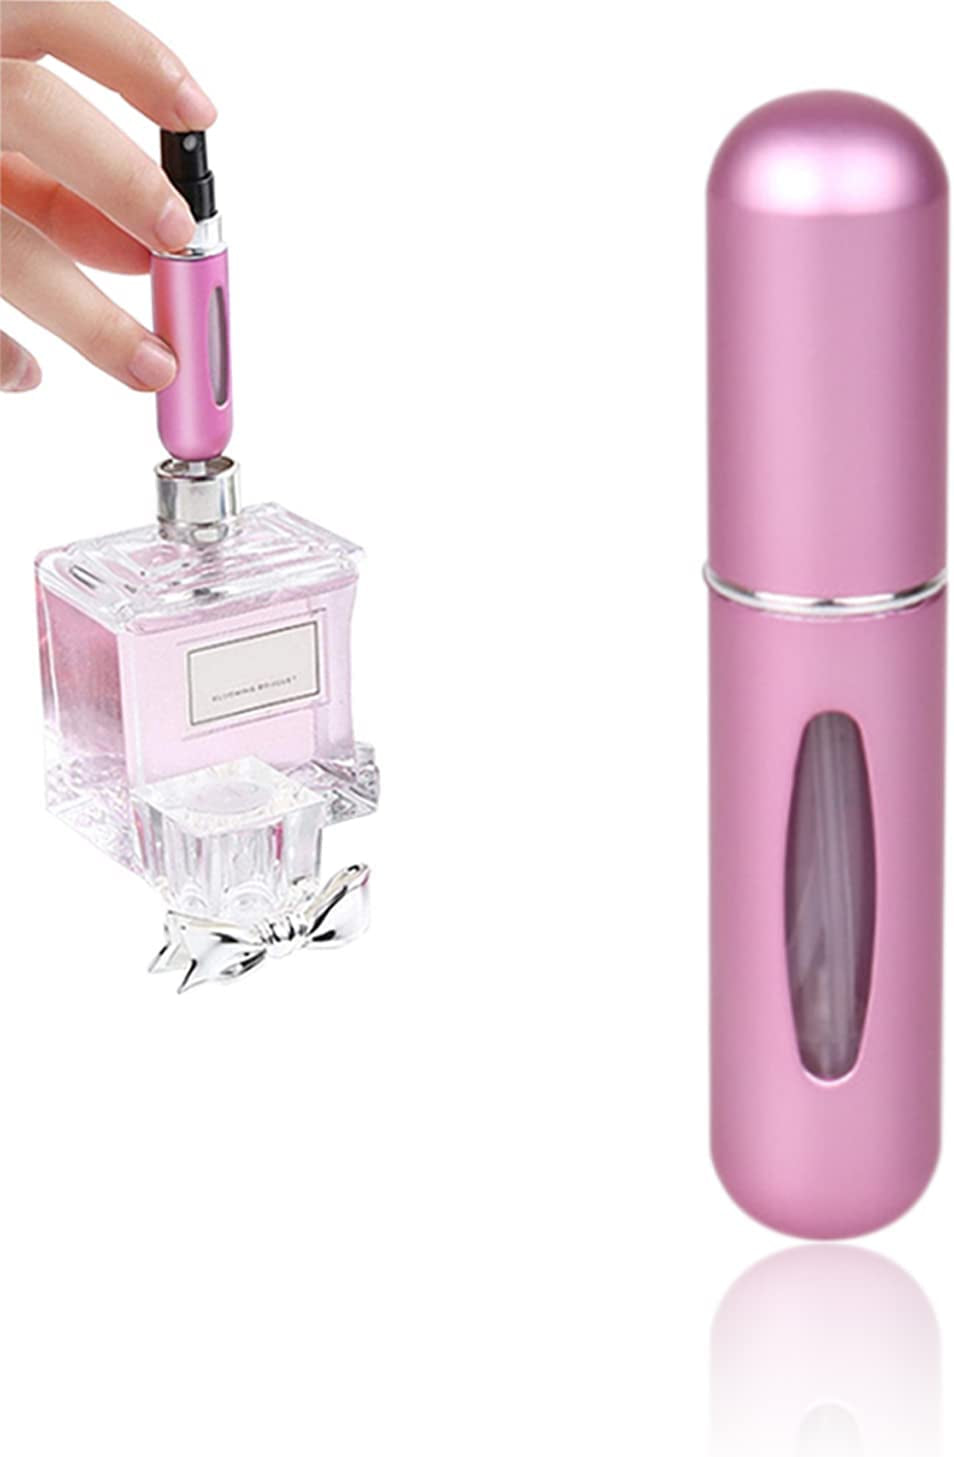 Mini Refillable Perfume Atomizer Spray Bottle, Portable Empty Fragrance Container Pump Case for Traveling and Outgoing 5Ml (Pink)